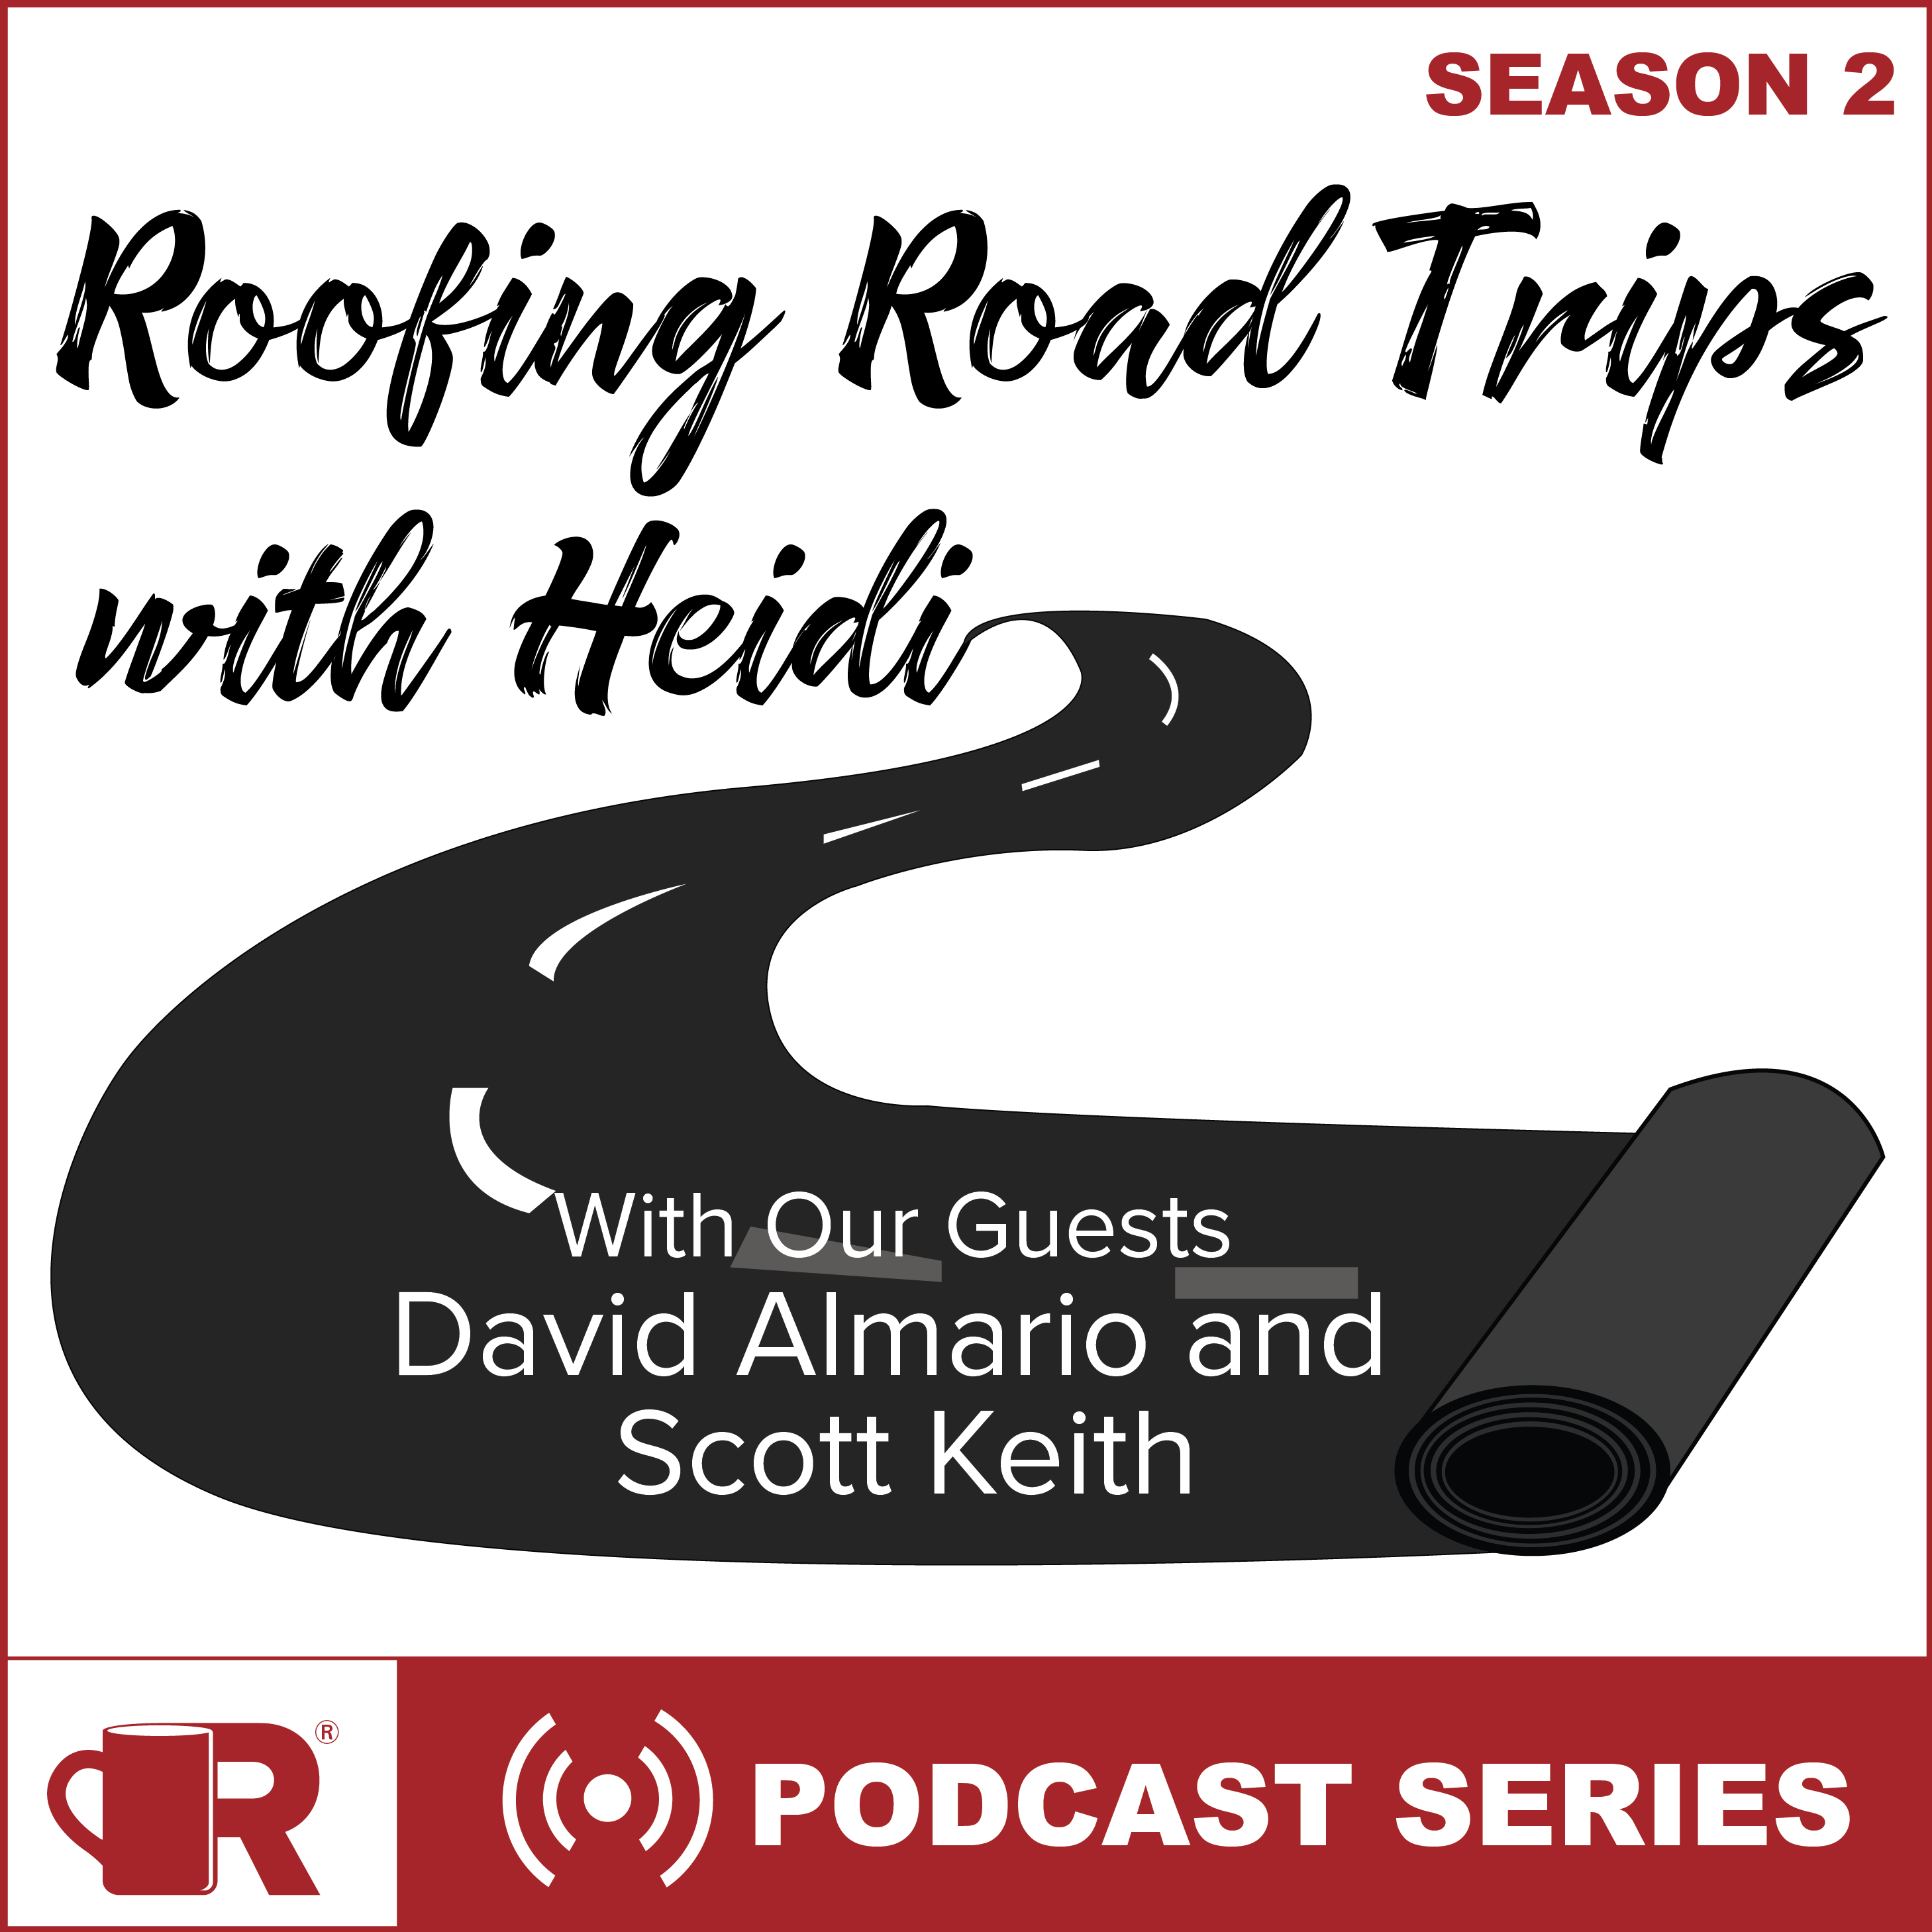 Roofing Road Trips with Heidi with Special Guests David Almario and Scott Keith